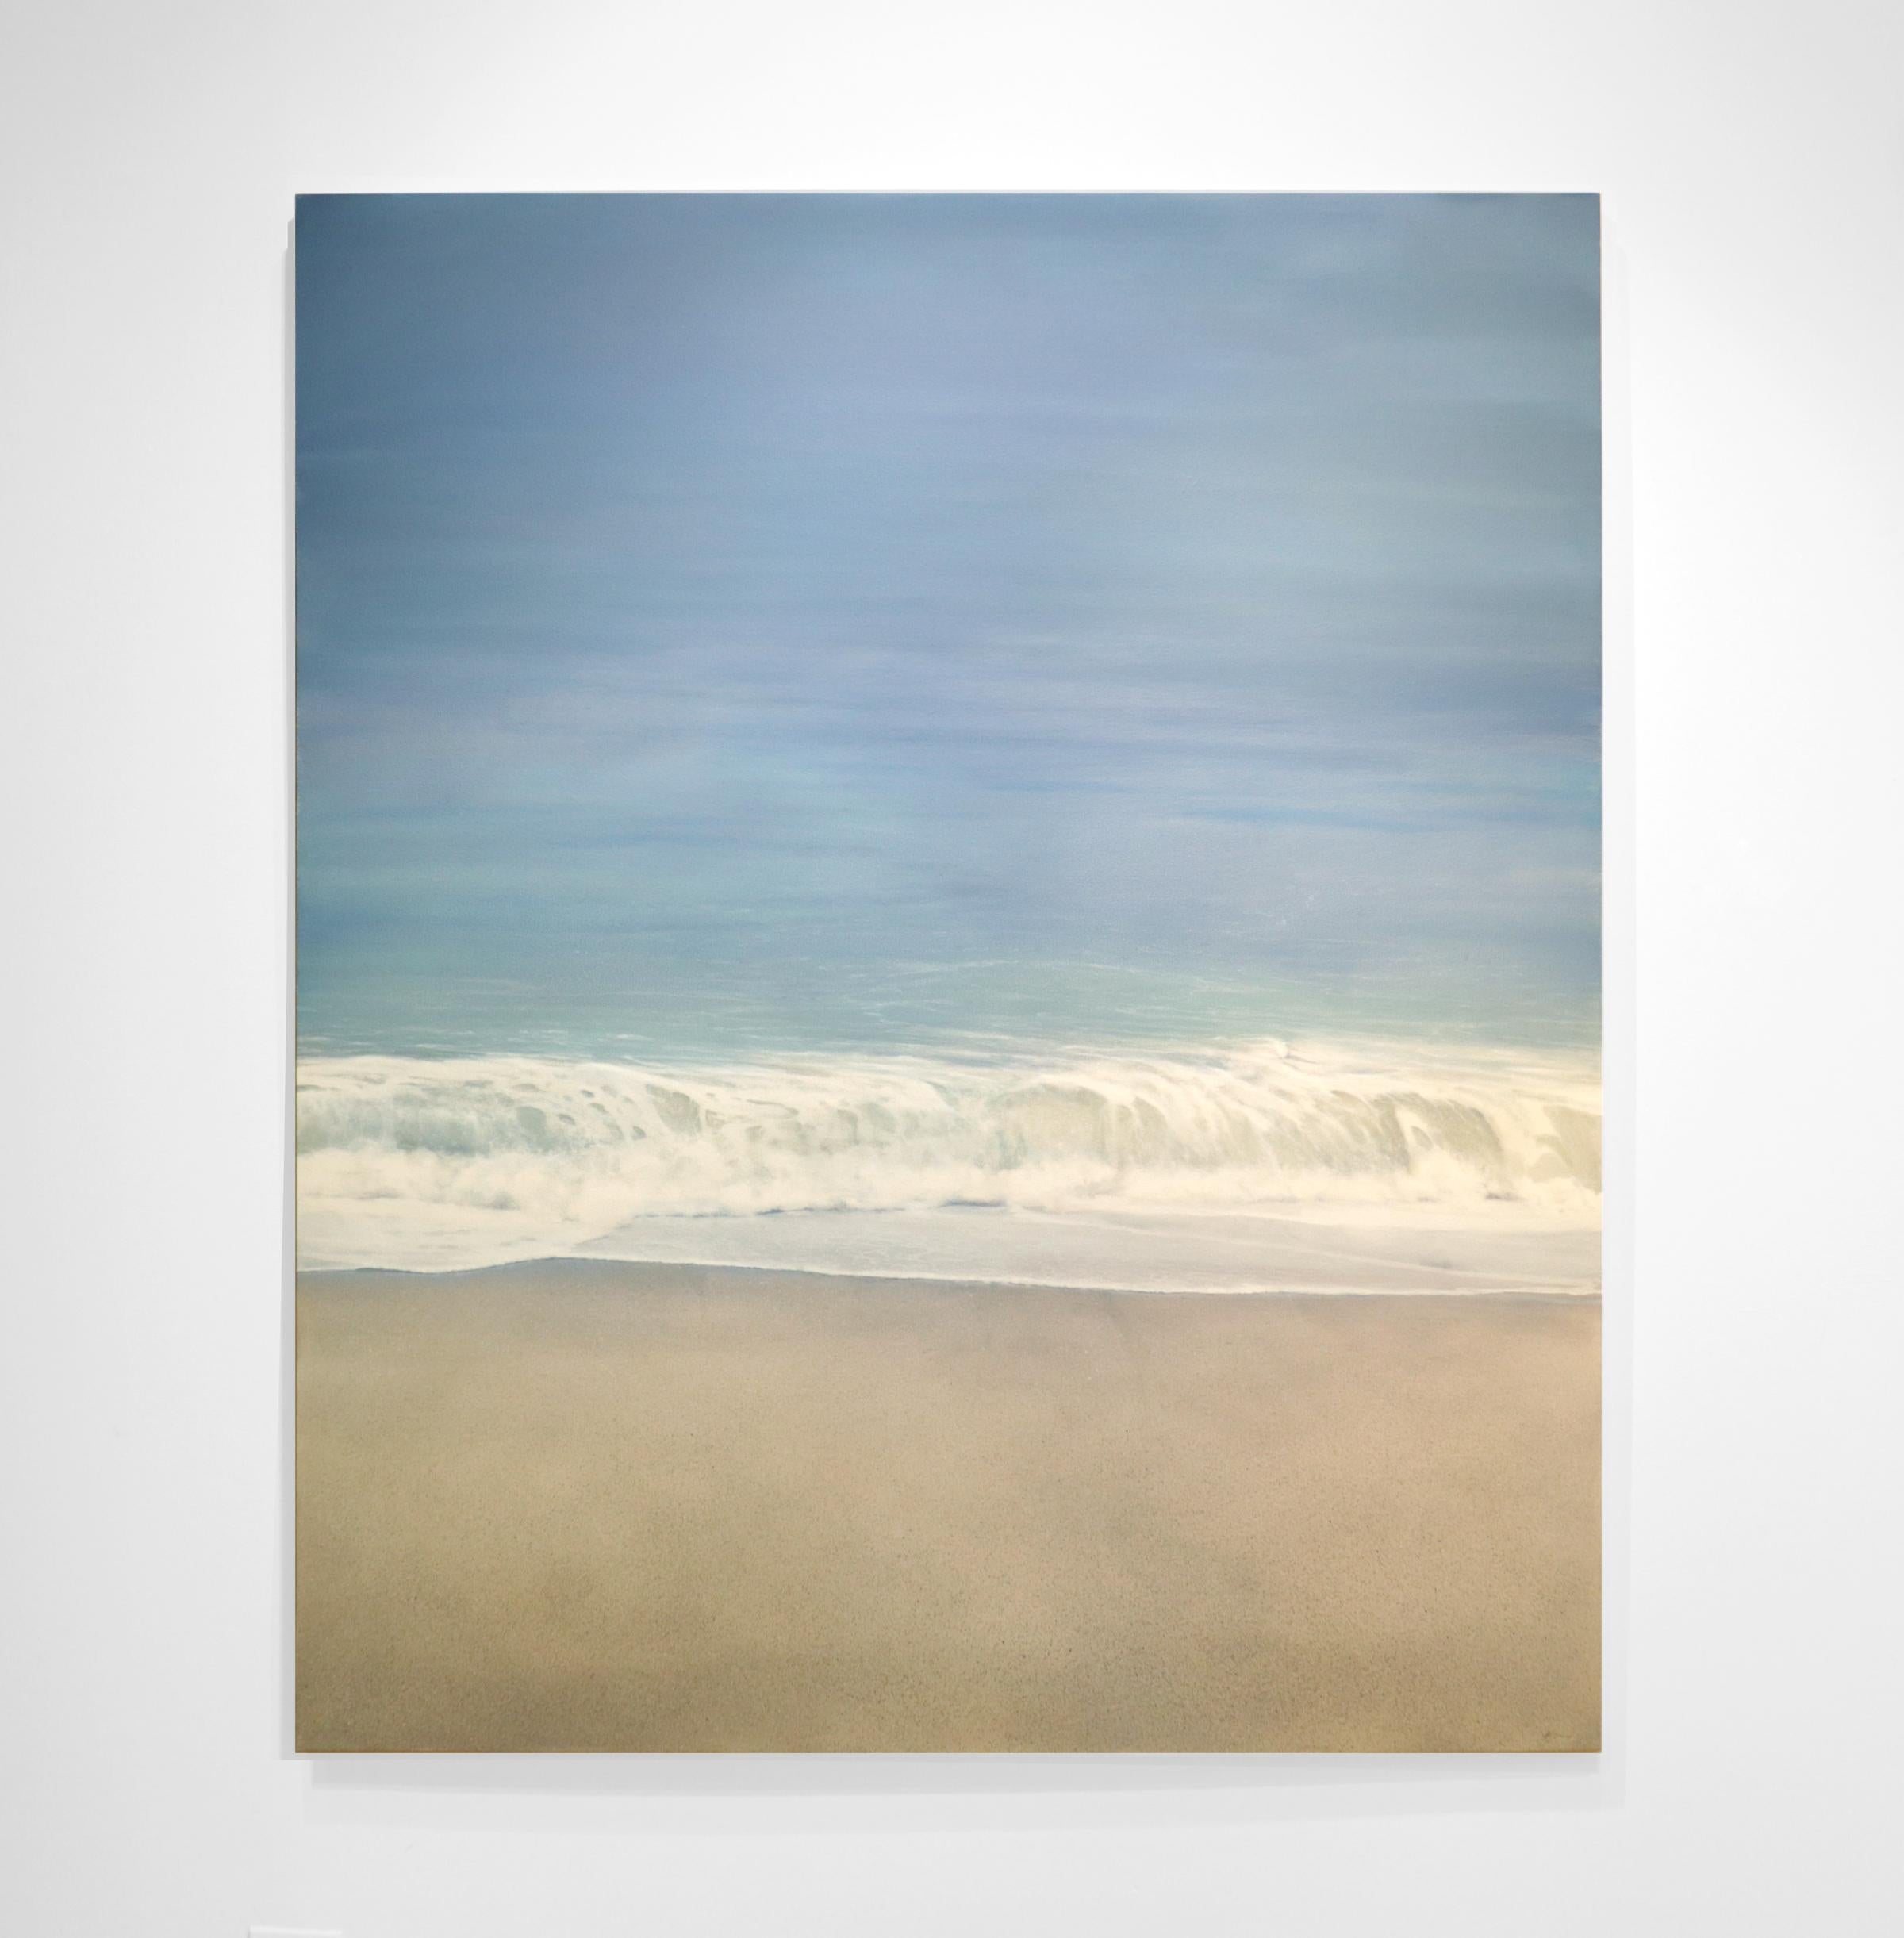 AMBIENT SURF, waves, beach, coastline, sand, muted colors, photo-realism - Contemporary Painting by Todd Kenyon